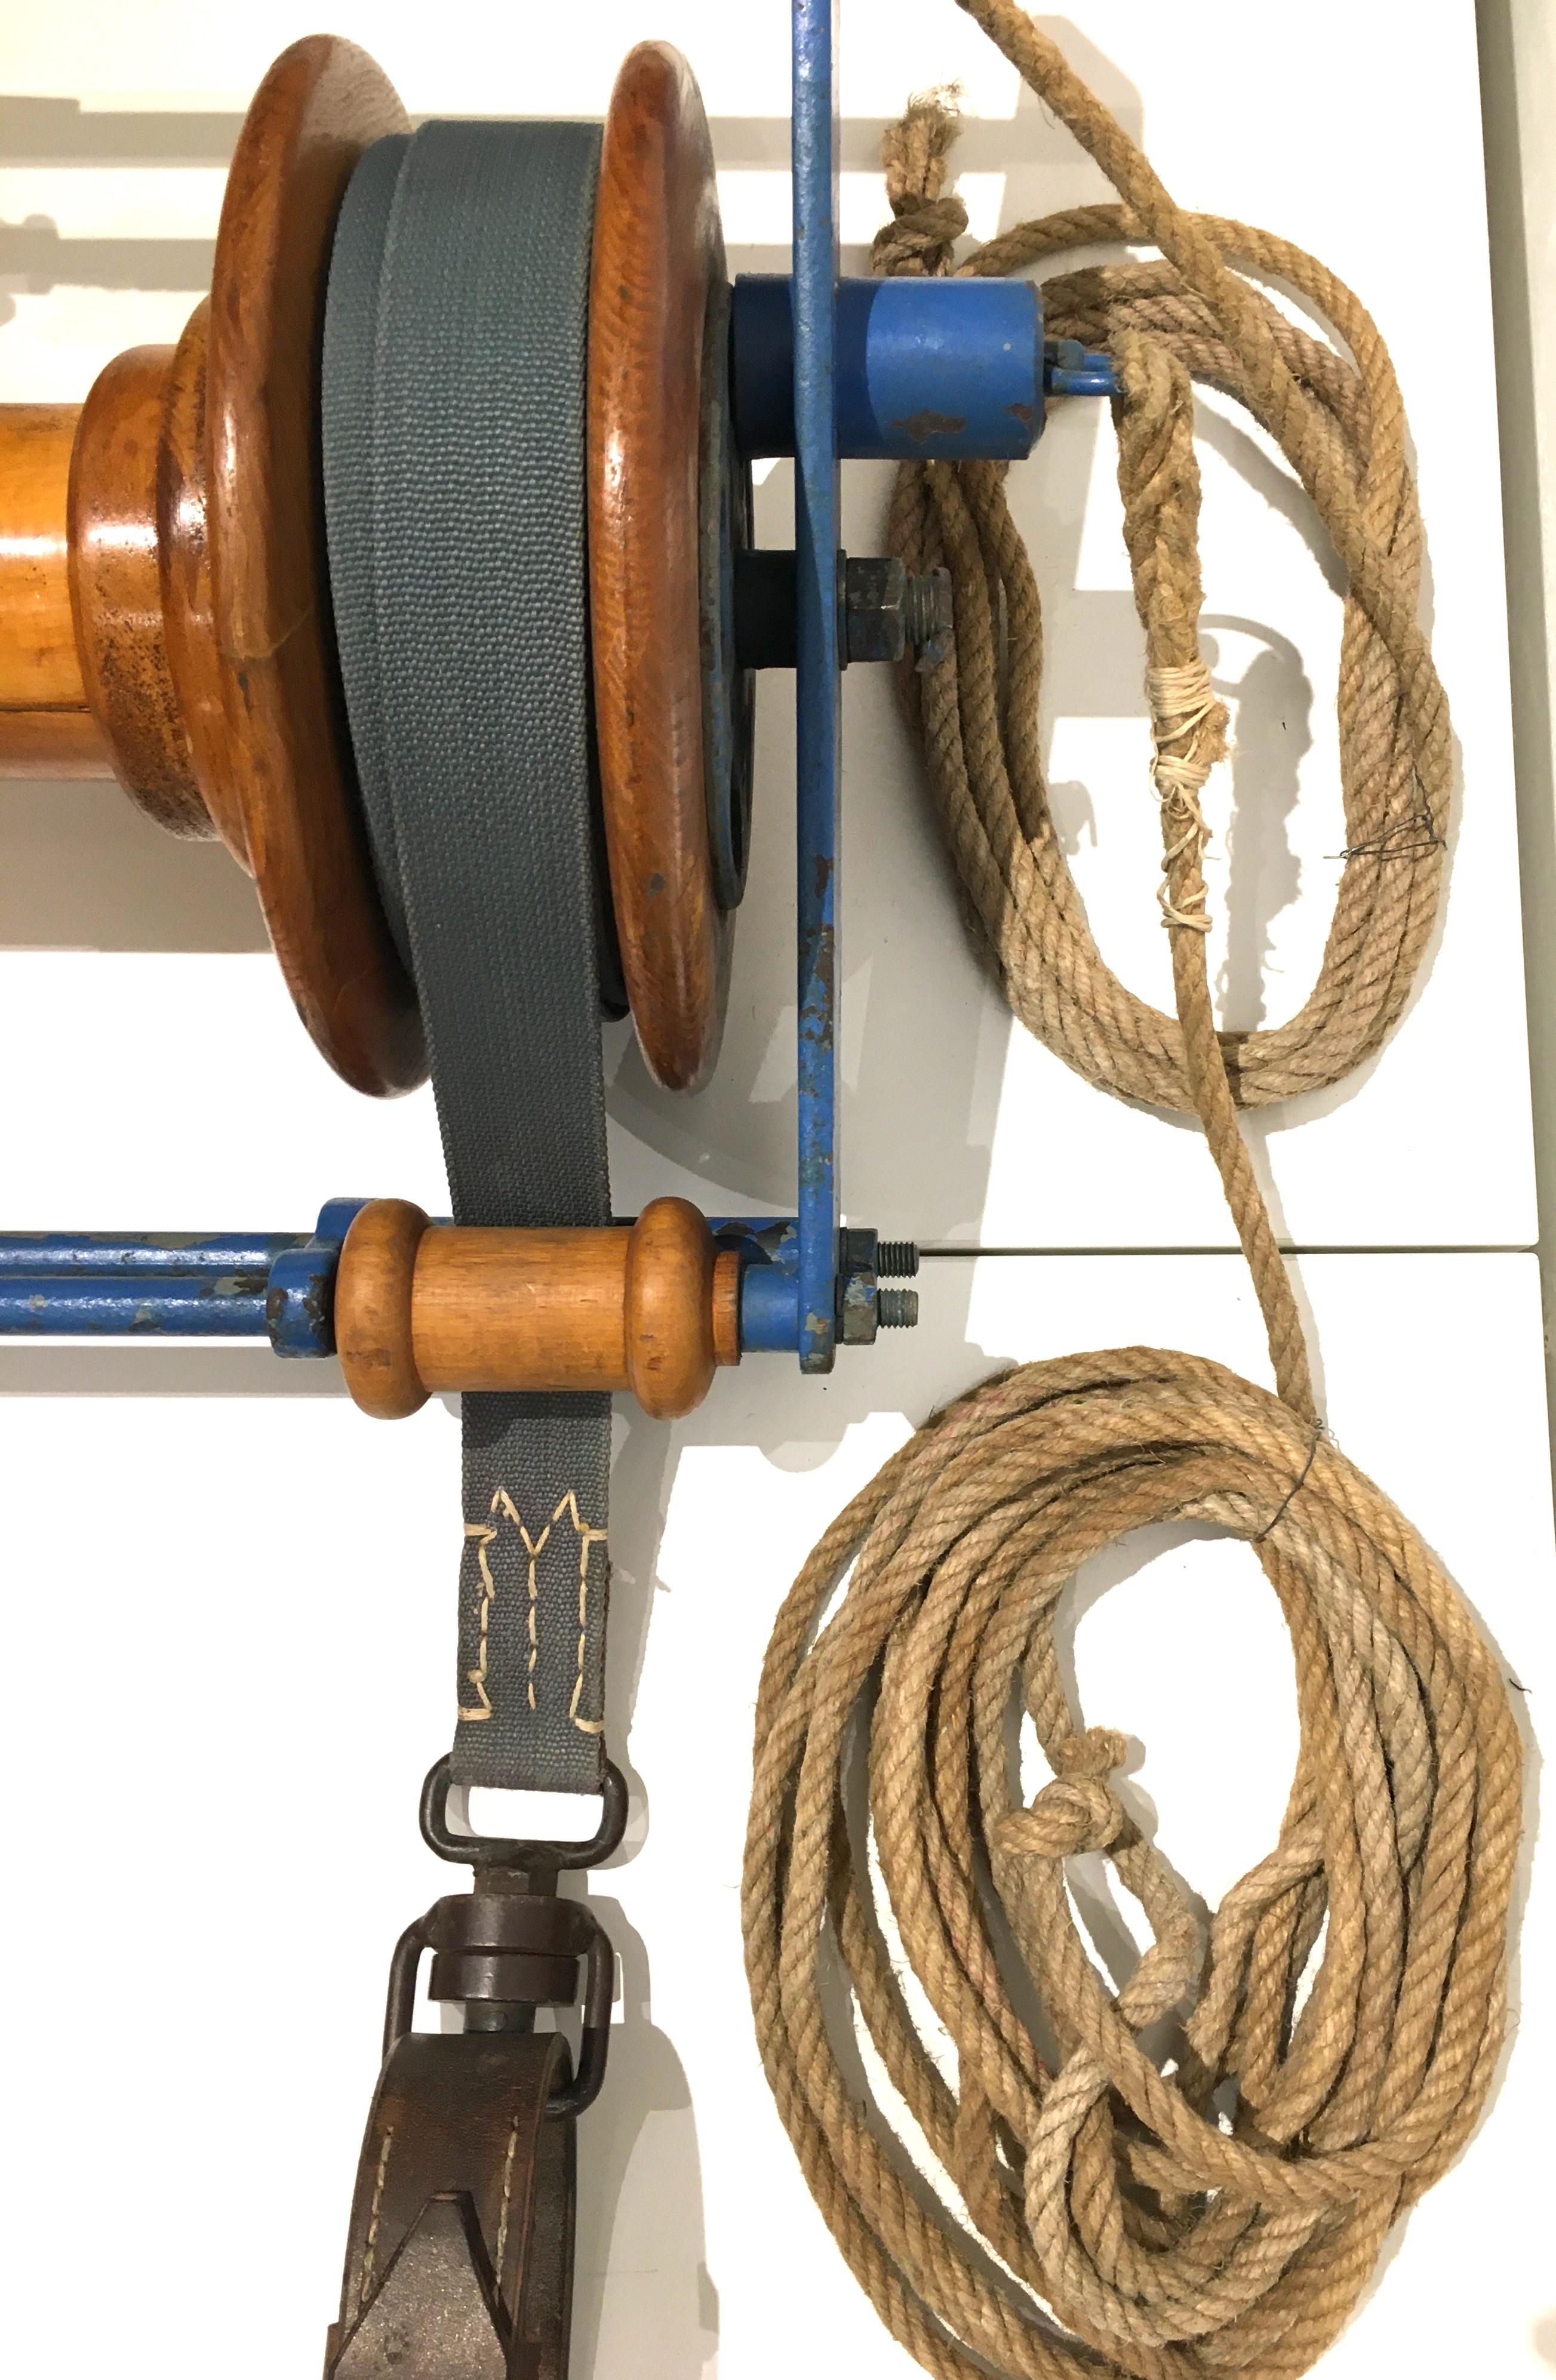 These gymnastics rings from a Czech gym were completely cleaned and the wooden parts restored and is in excellent condition. It can be used for your daily training or as an extravagant decoration. Shipping in a wooden box.